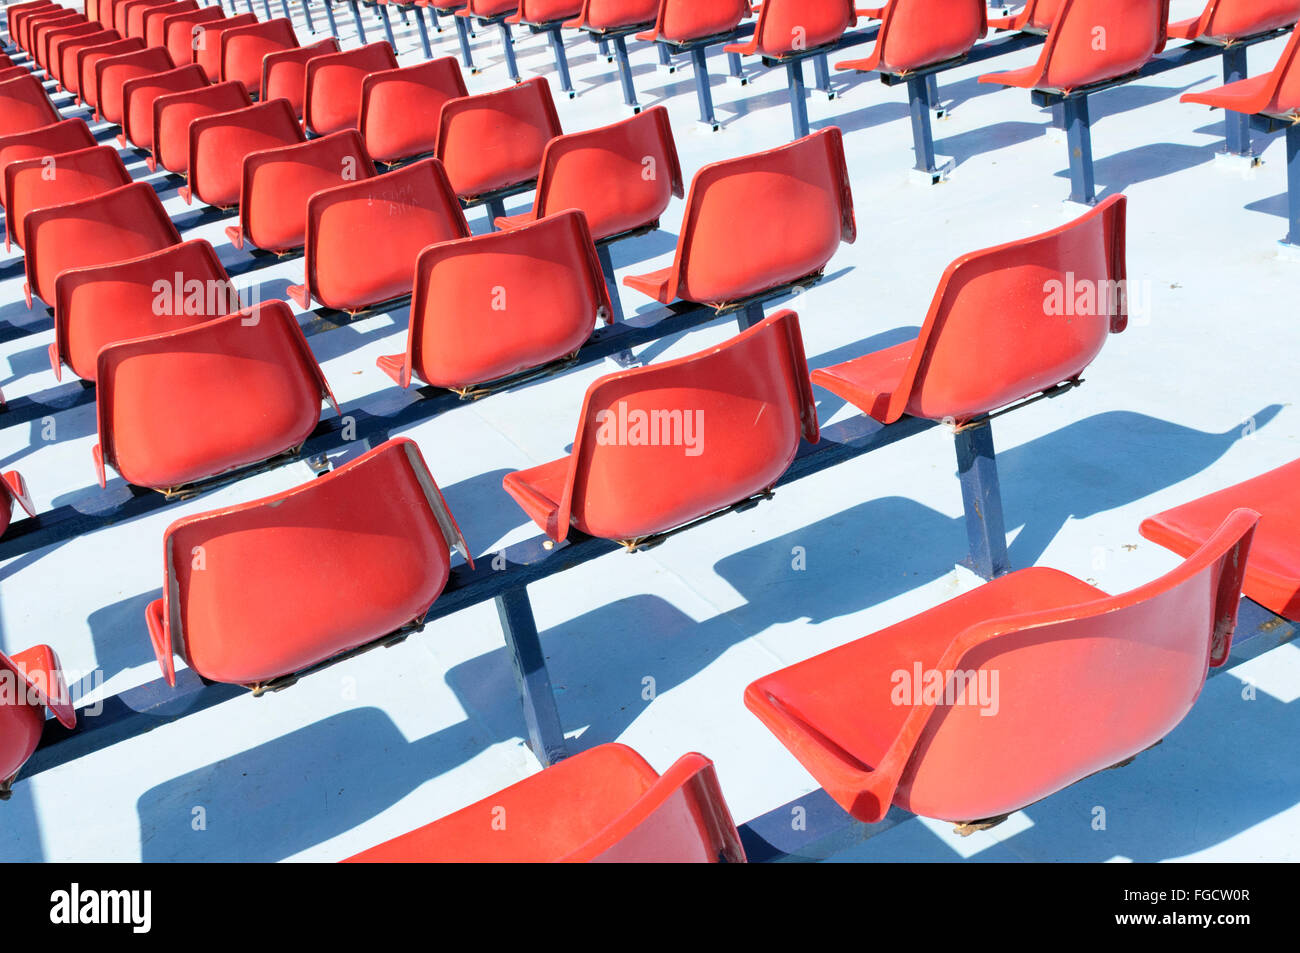 Rows of empty red seats on the upper deck of a passenger ferry Stock Photo